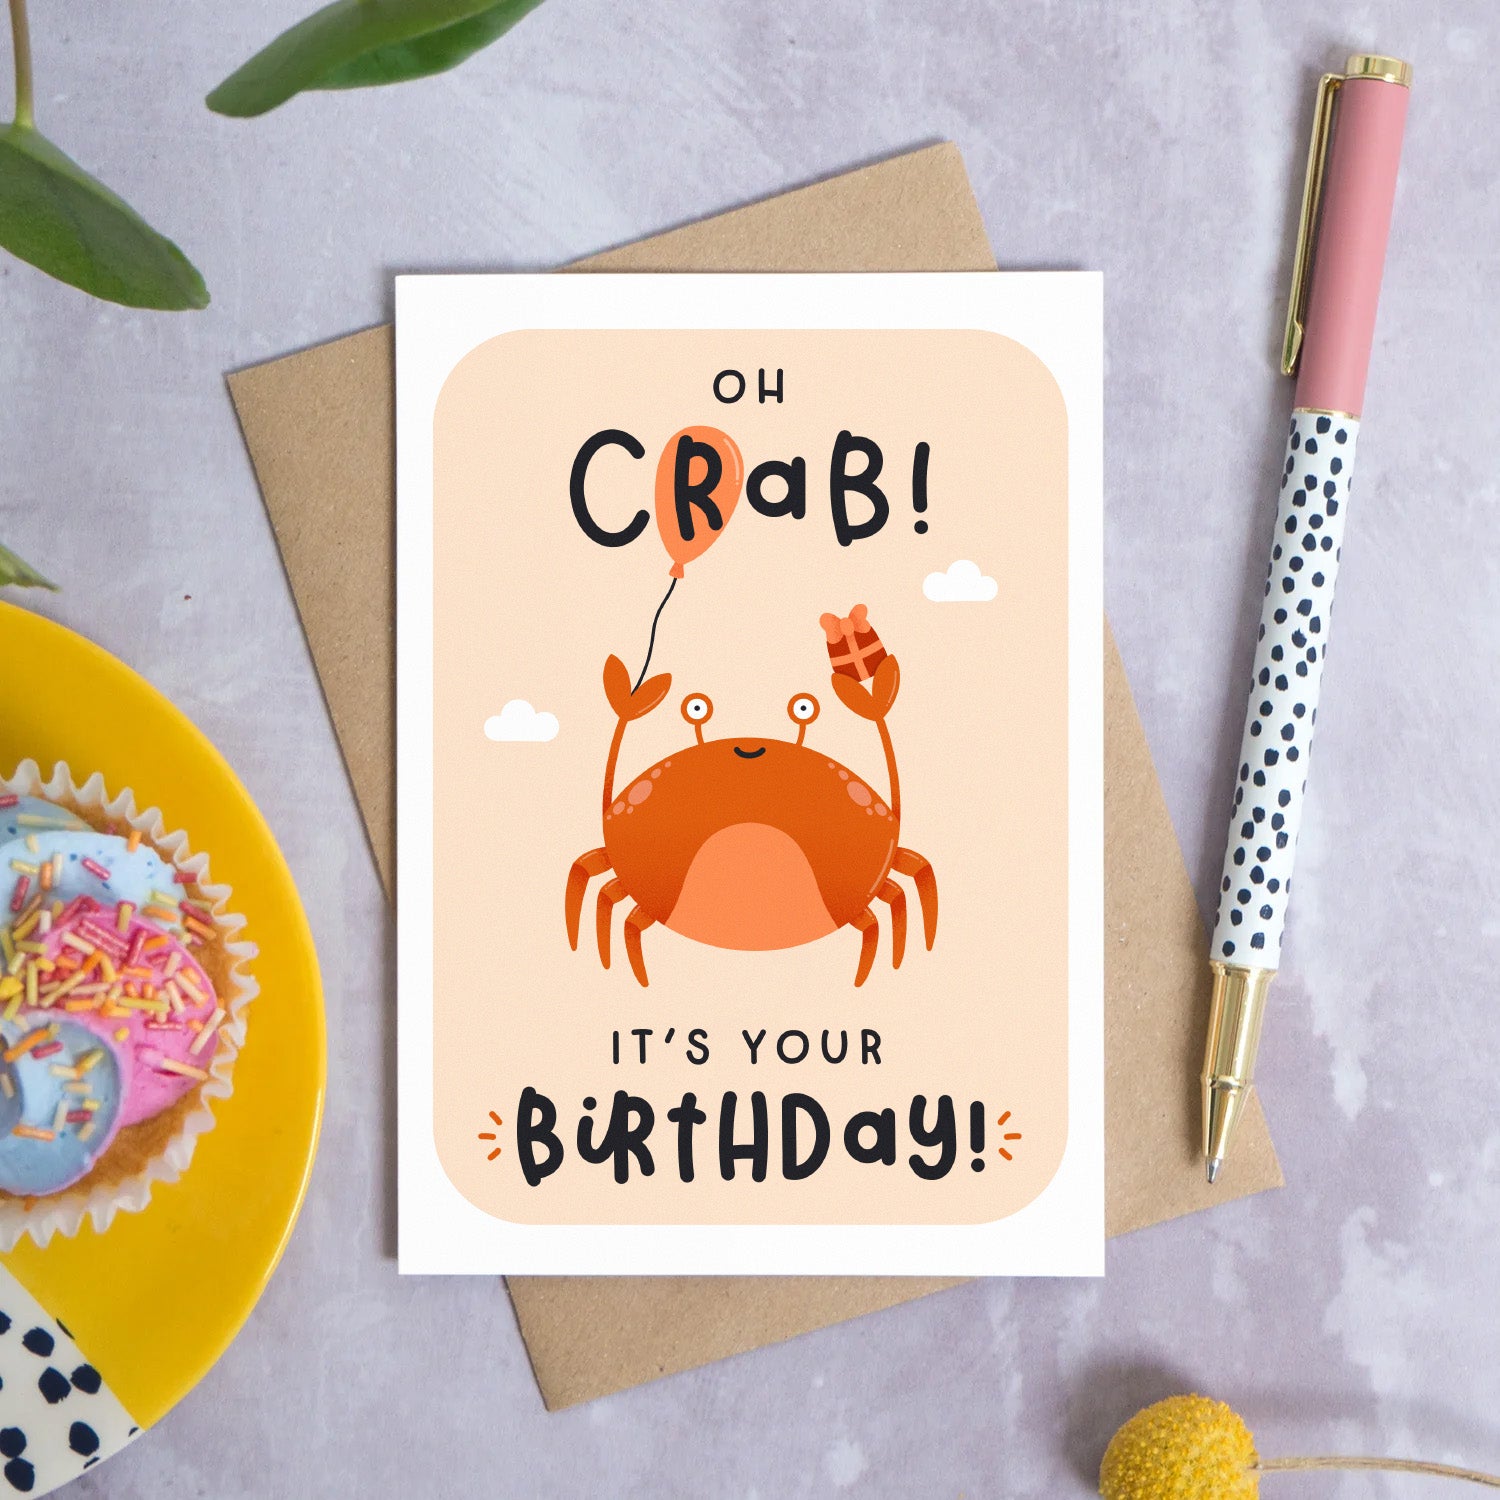 A birthday card featuring a crab holding a balloon and a present with the words ‘oh crab, it’s your birthday!’. The card is lying on a Kraft brown envelope on a grey surface. Surrounding the card are leaves, flowers, a pen and a cupcake on a plate.